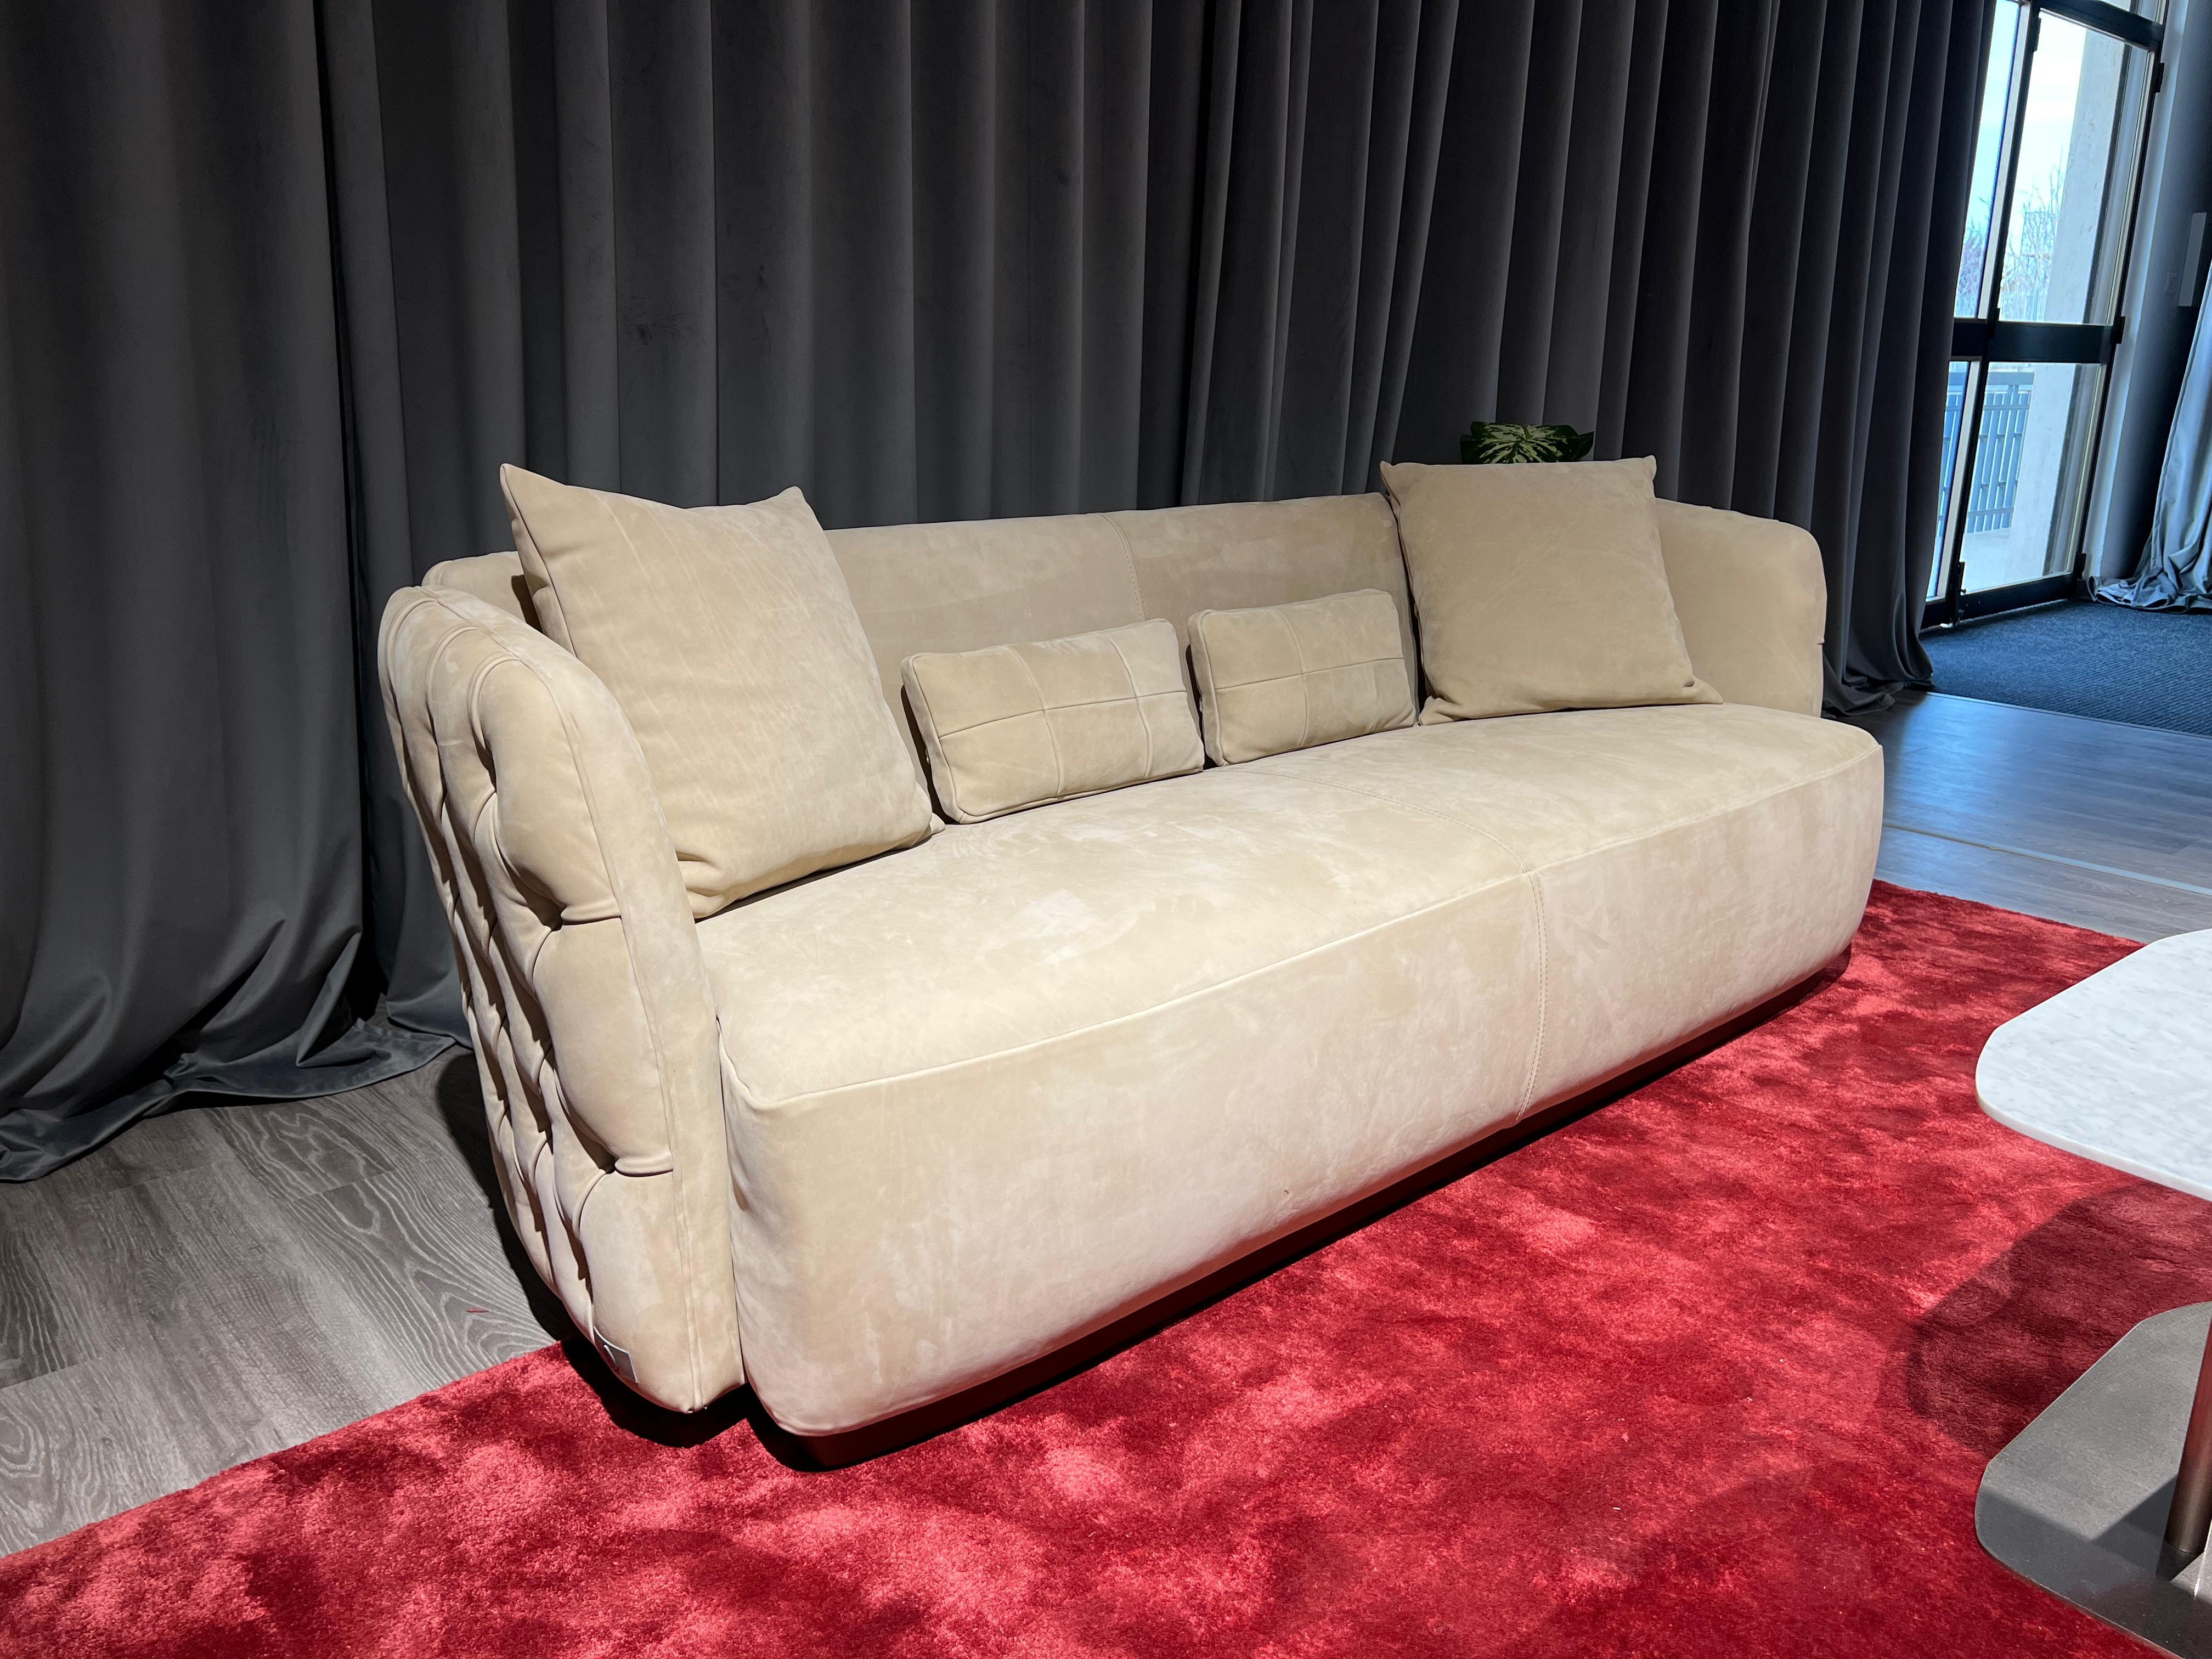 A classic sofa king interpreted in a modern key, capitonné work, a decorative classic in the production of high-end sofas, distributed on the back of the backrest and armrests, a strong reminder of the faces of a diamond.

Available in beige nubuck